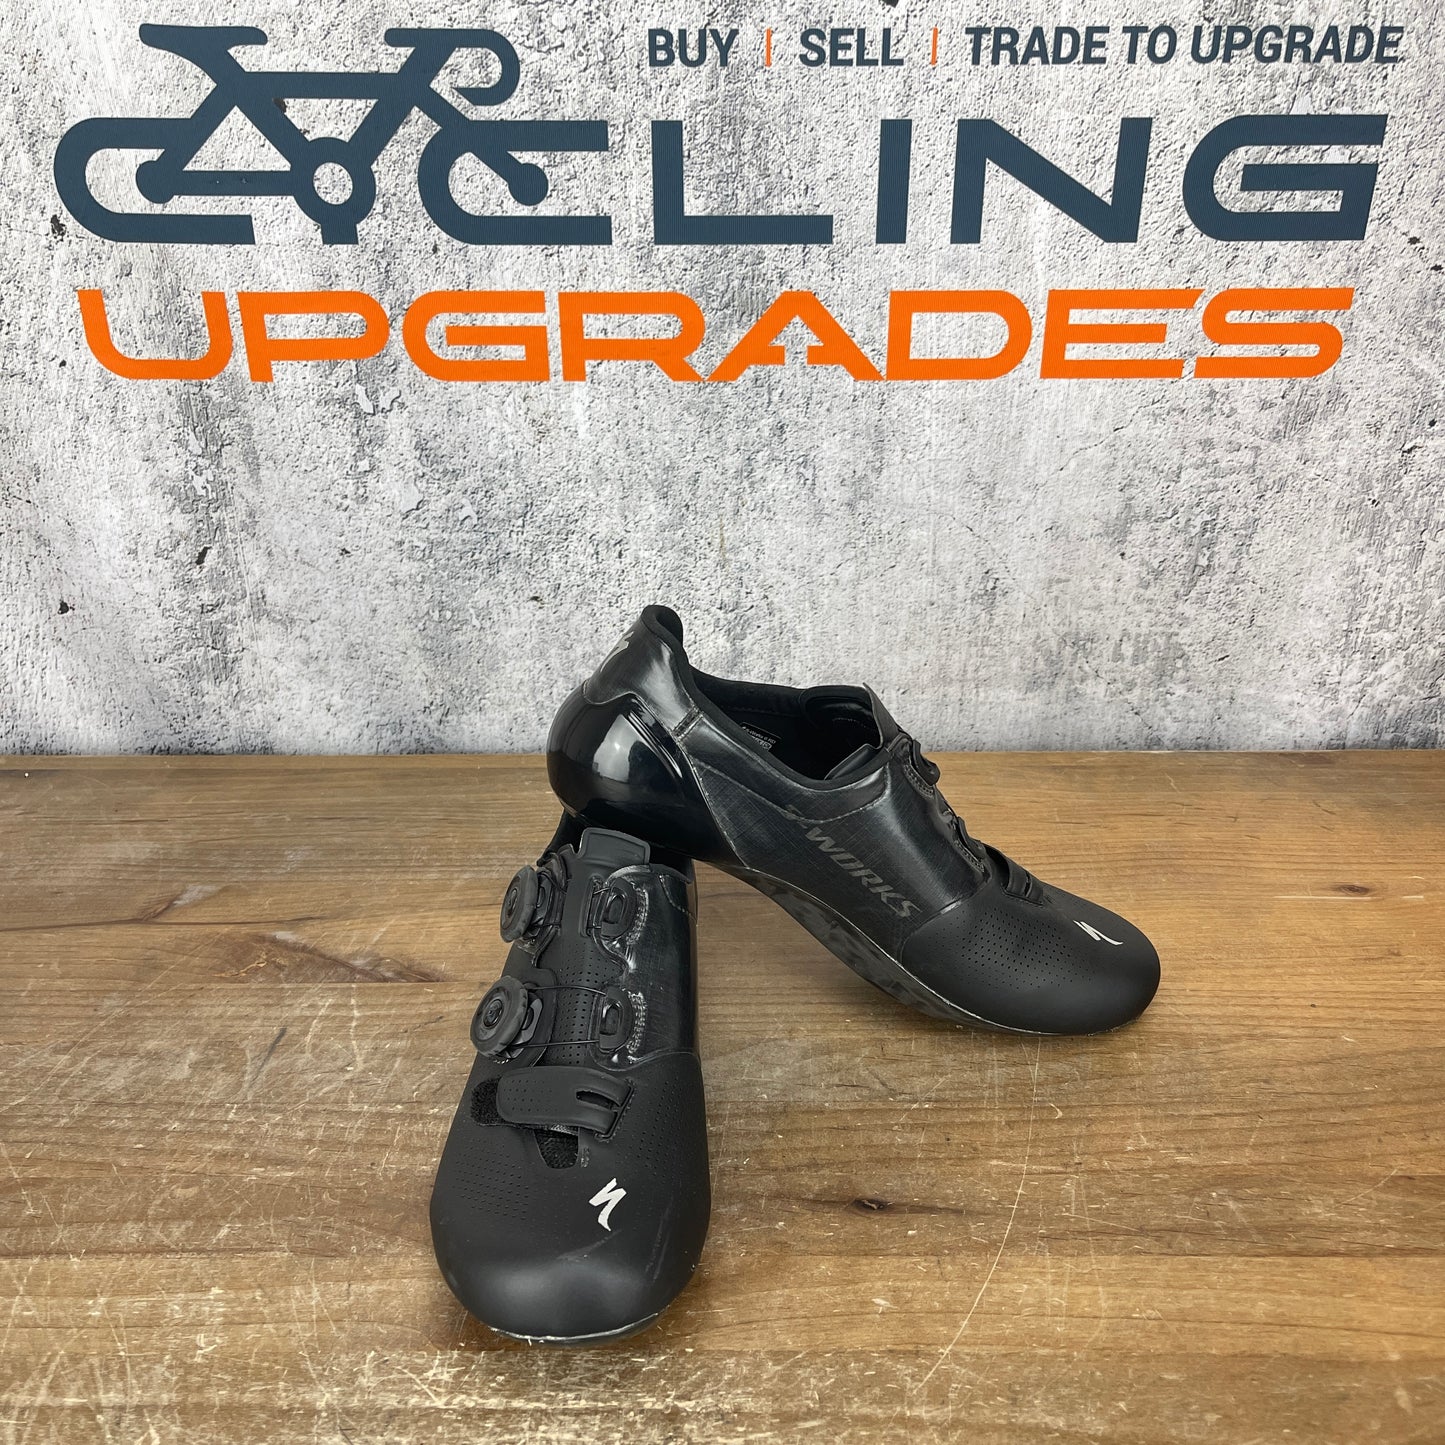 Specialized S-works 6 Road 40.5 EU 7.75 US Women's 3-Bolt Cycling Shoes